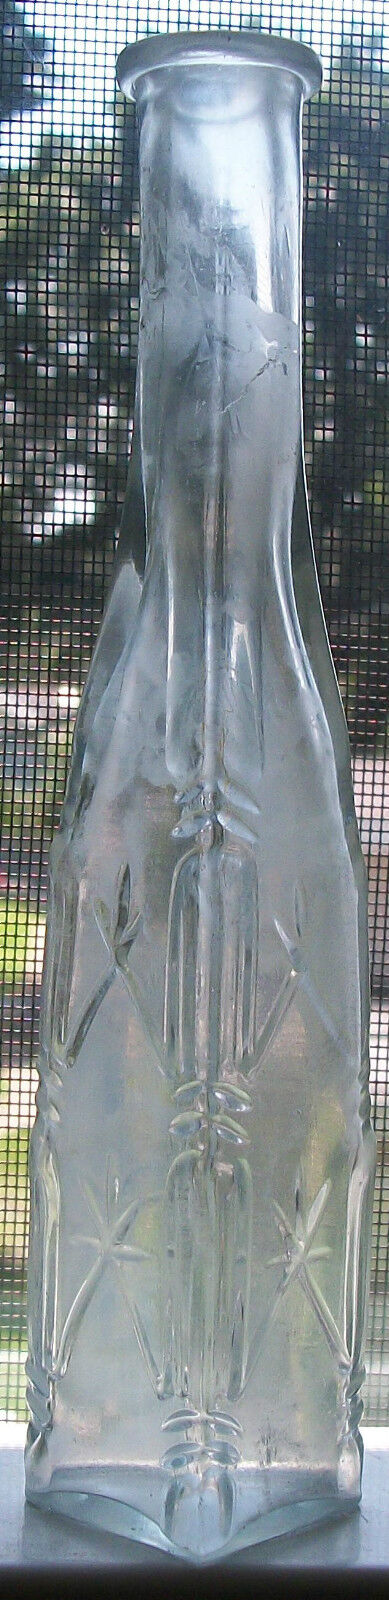 CROSS PATTERN TYPE PERFUME COLOGNE OR COLOGNE 1875 NEAT FIGURAL DESIGN